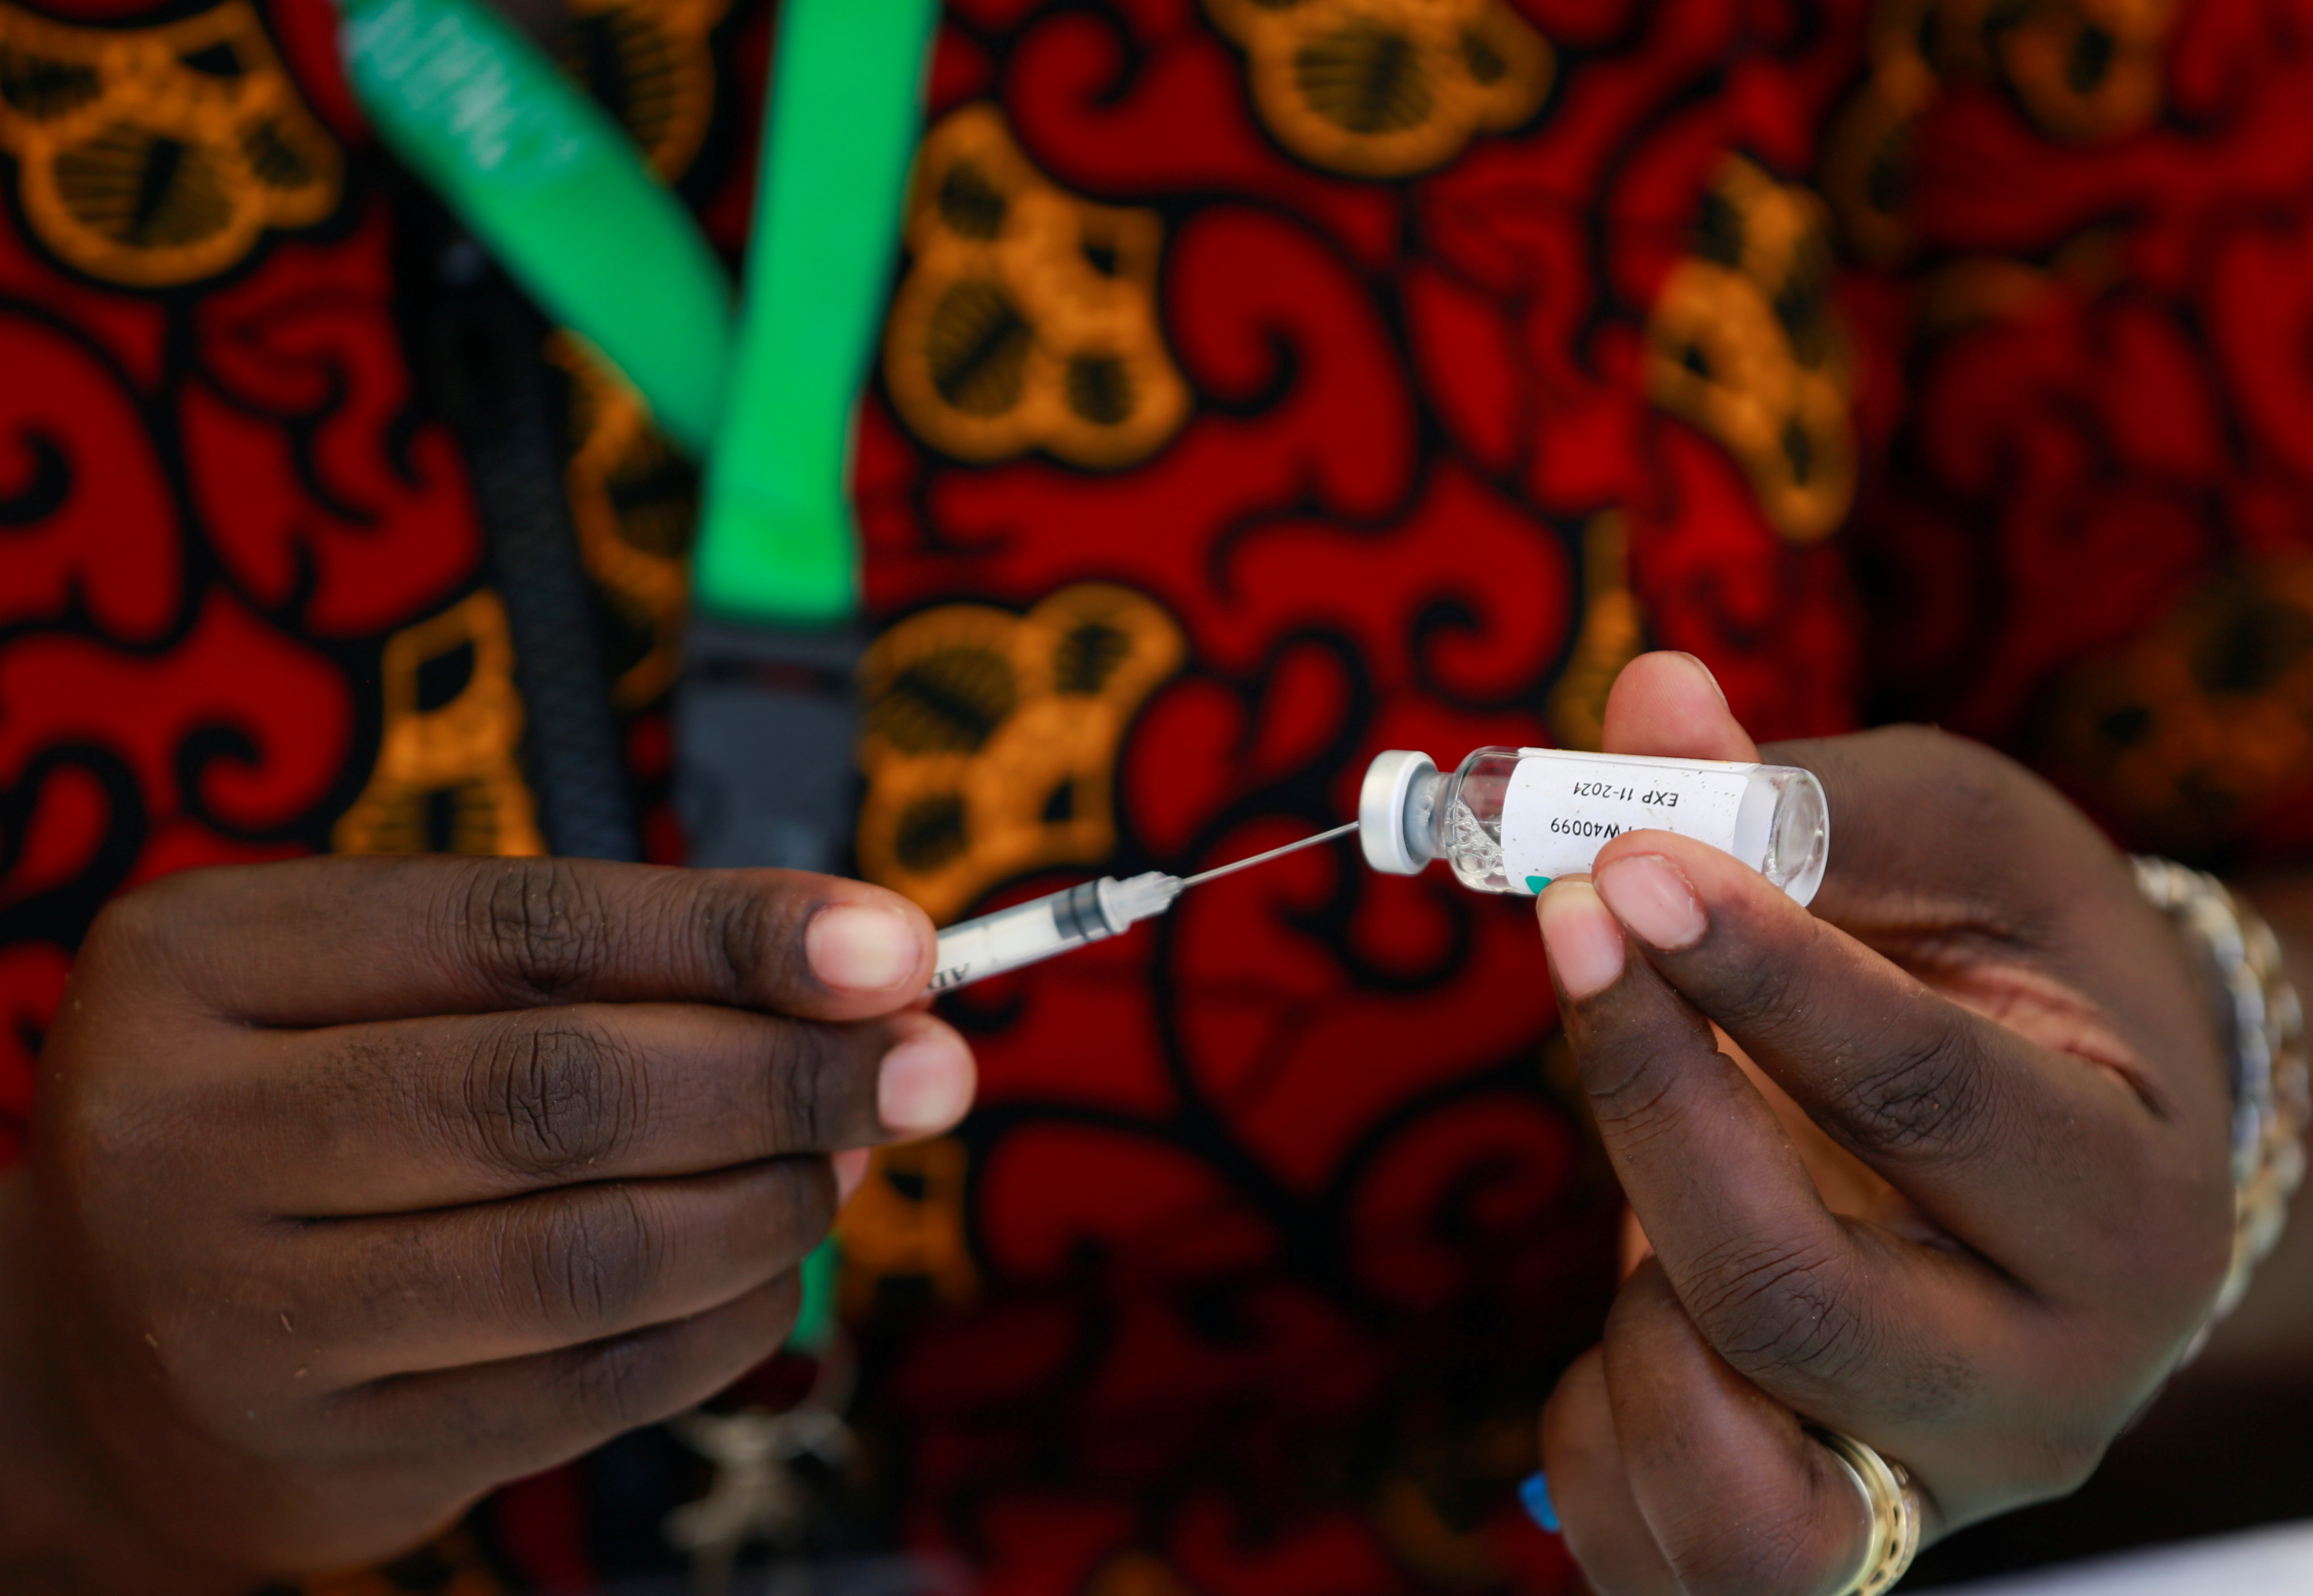 A health worker is takes a dose of the COVID-19 vaccine from a vial during the roll out of mass vaccination in Abuja